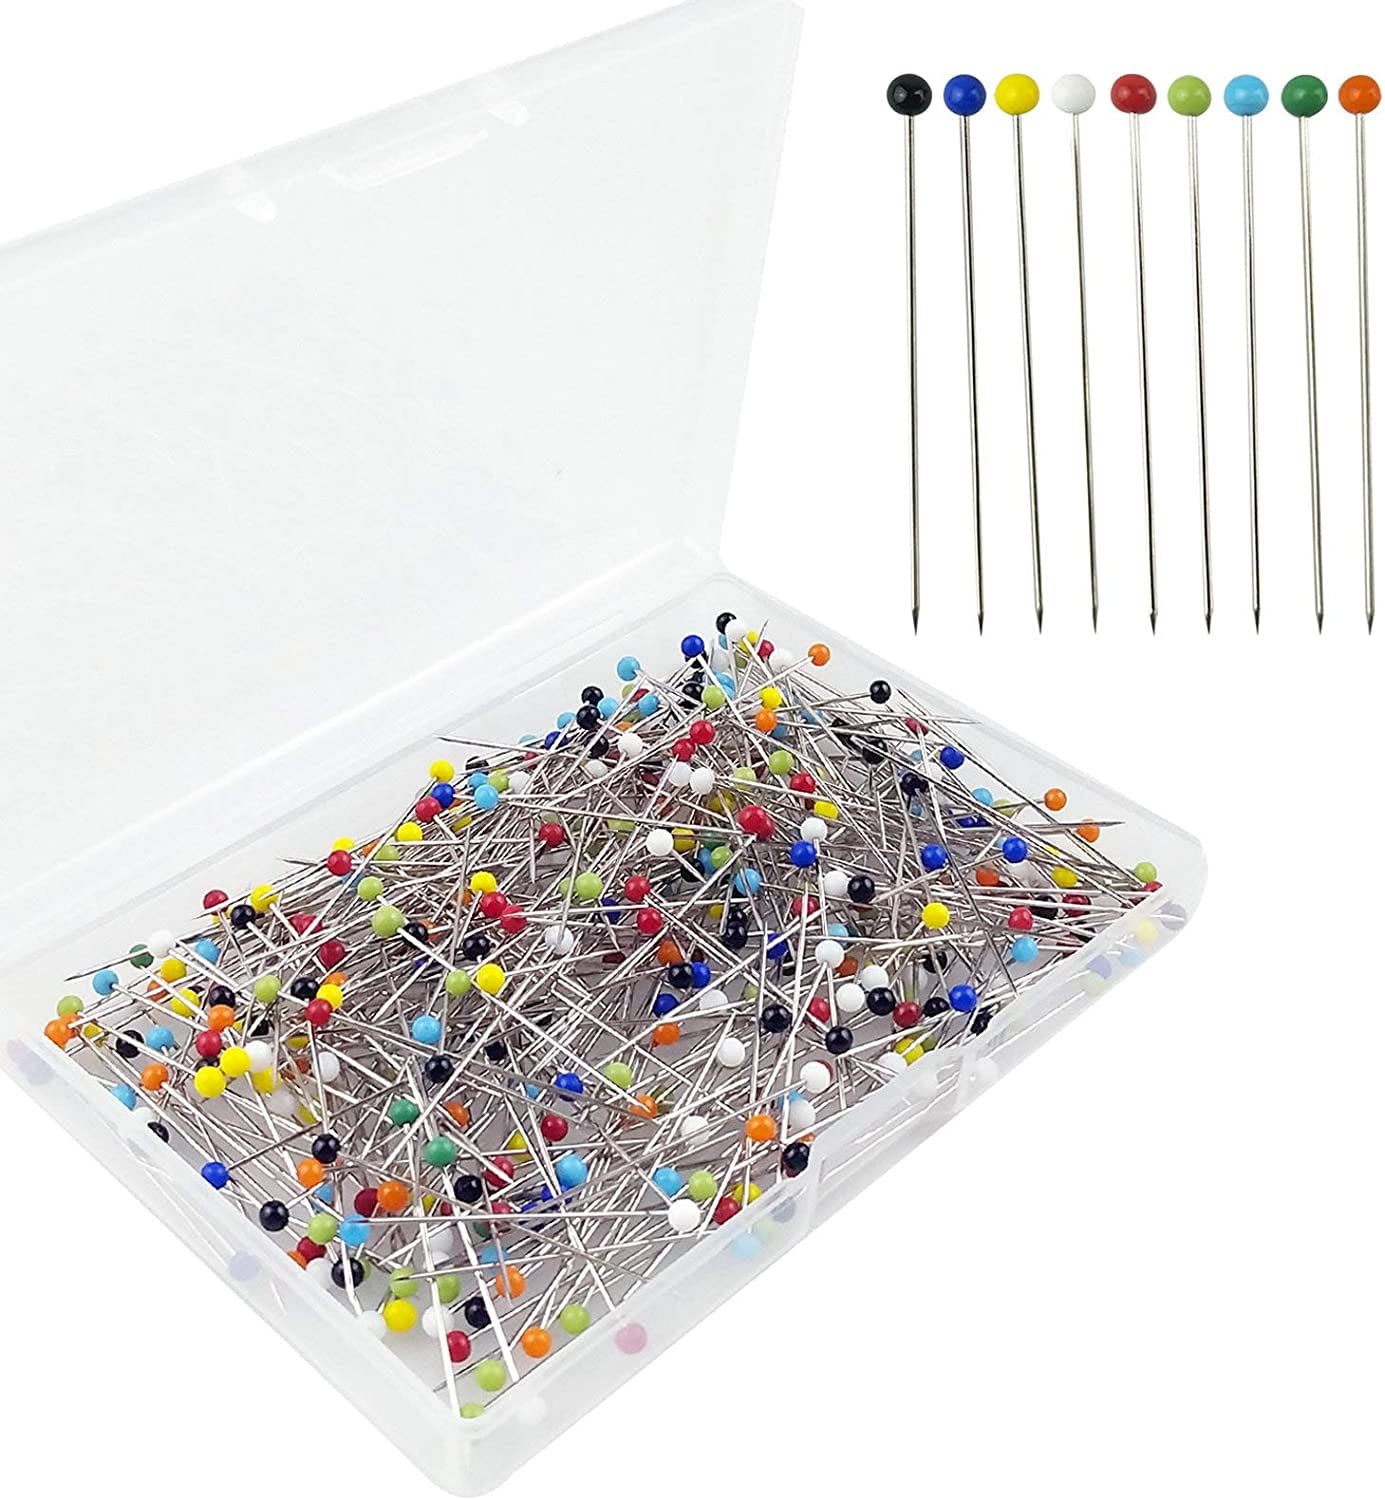 Csdtylh 500 Pcs Flat Button &Flower Head Pins,Straight Pins, Quilting Pins with Cases